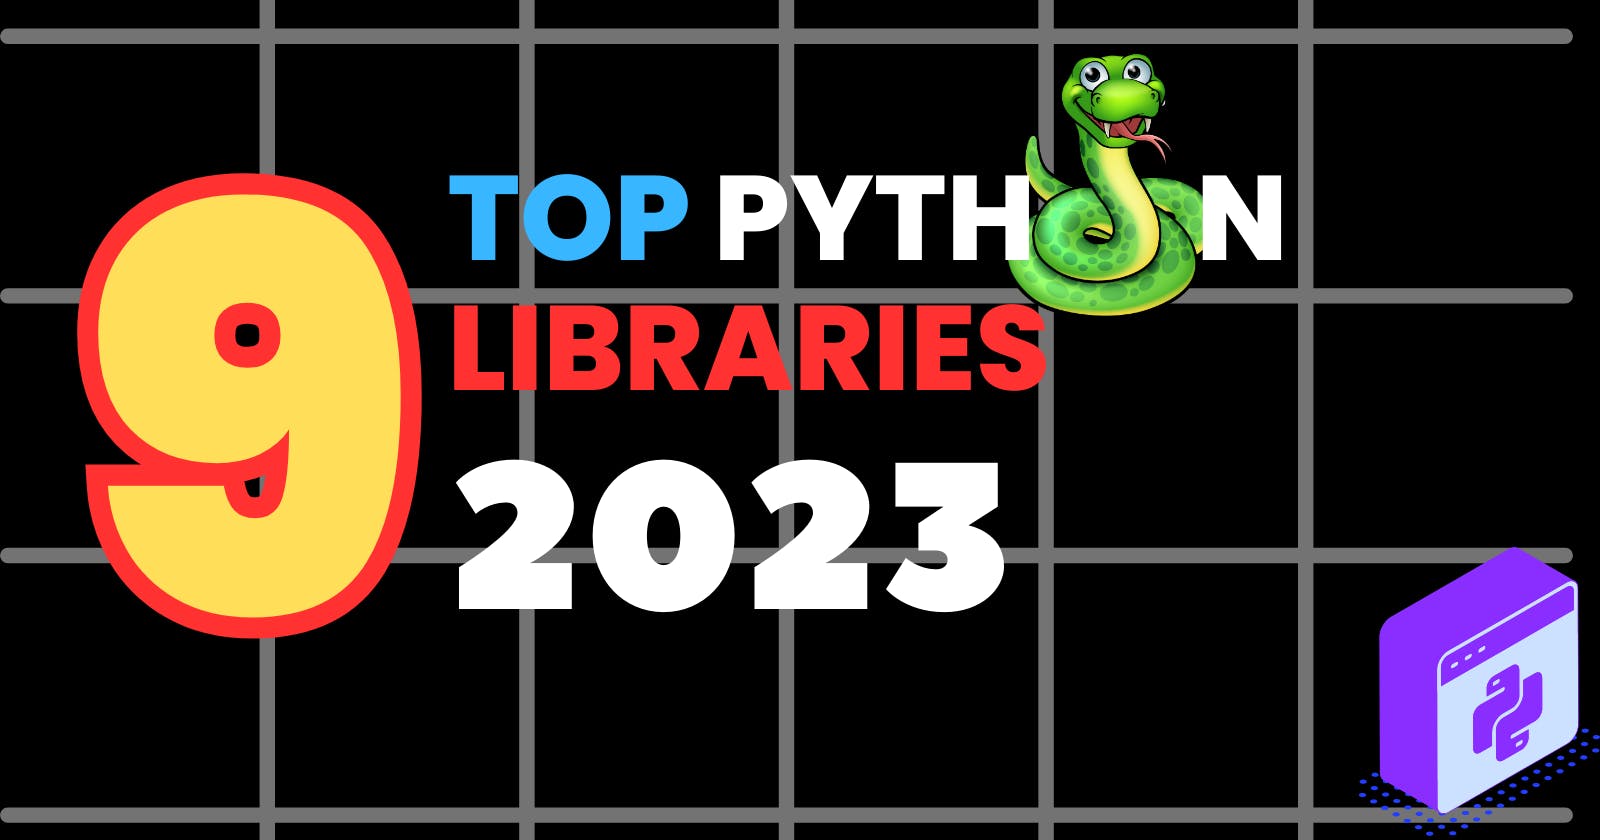 9 - Top Python Libraries to Learn in 2023